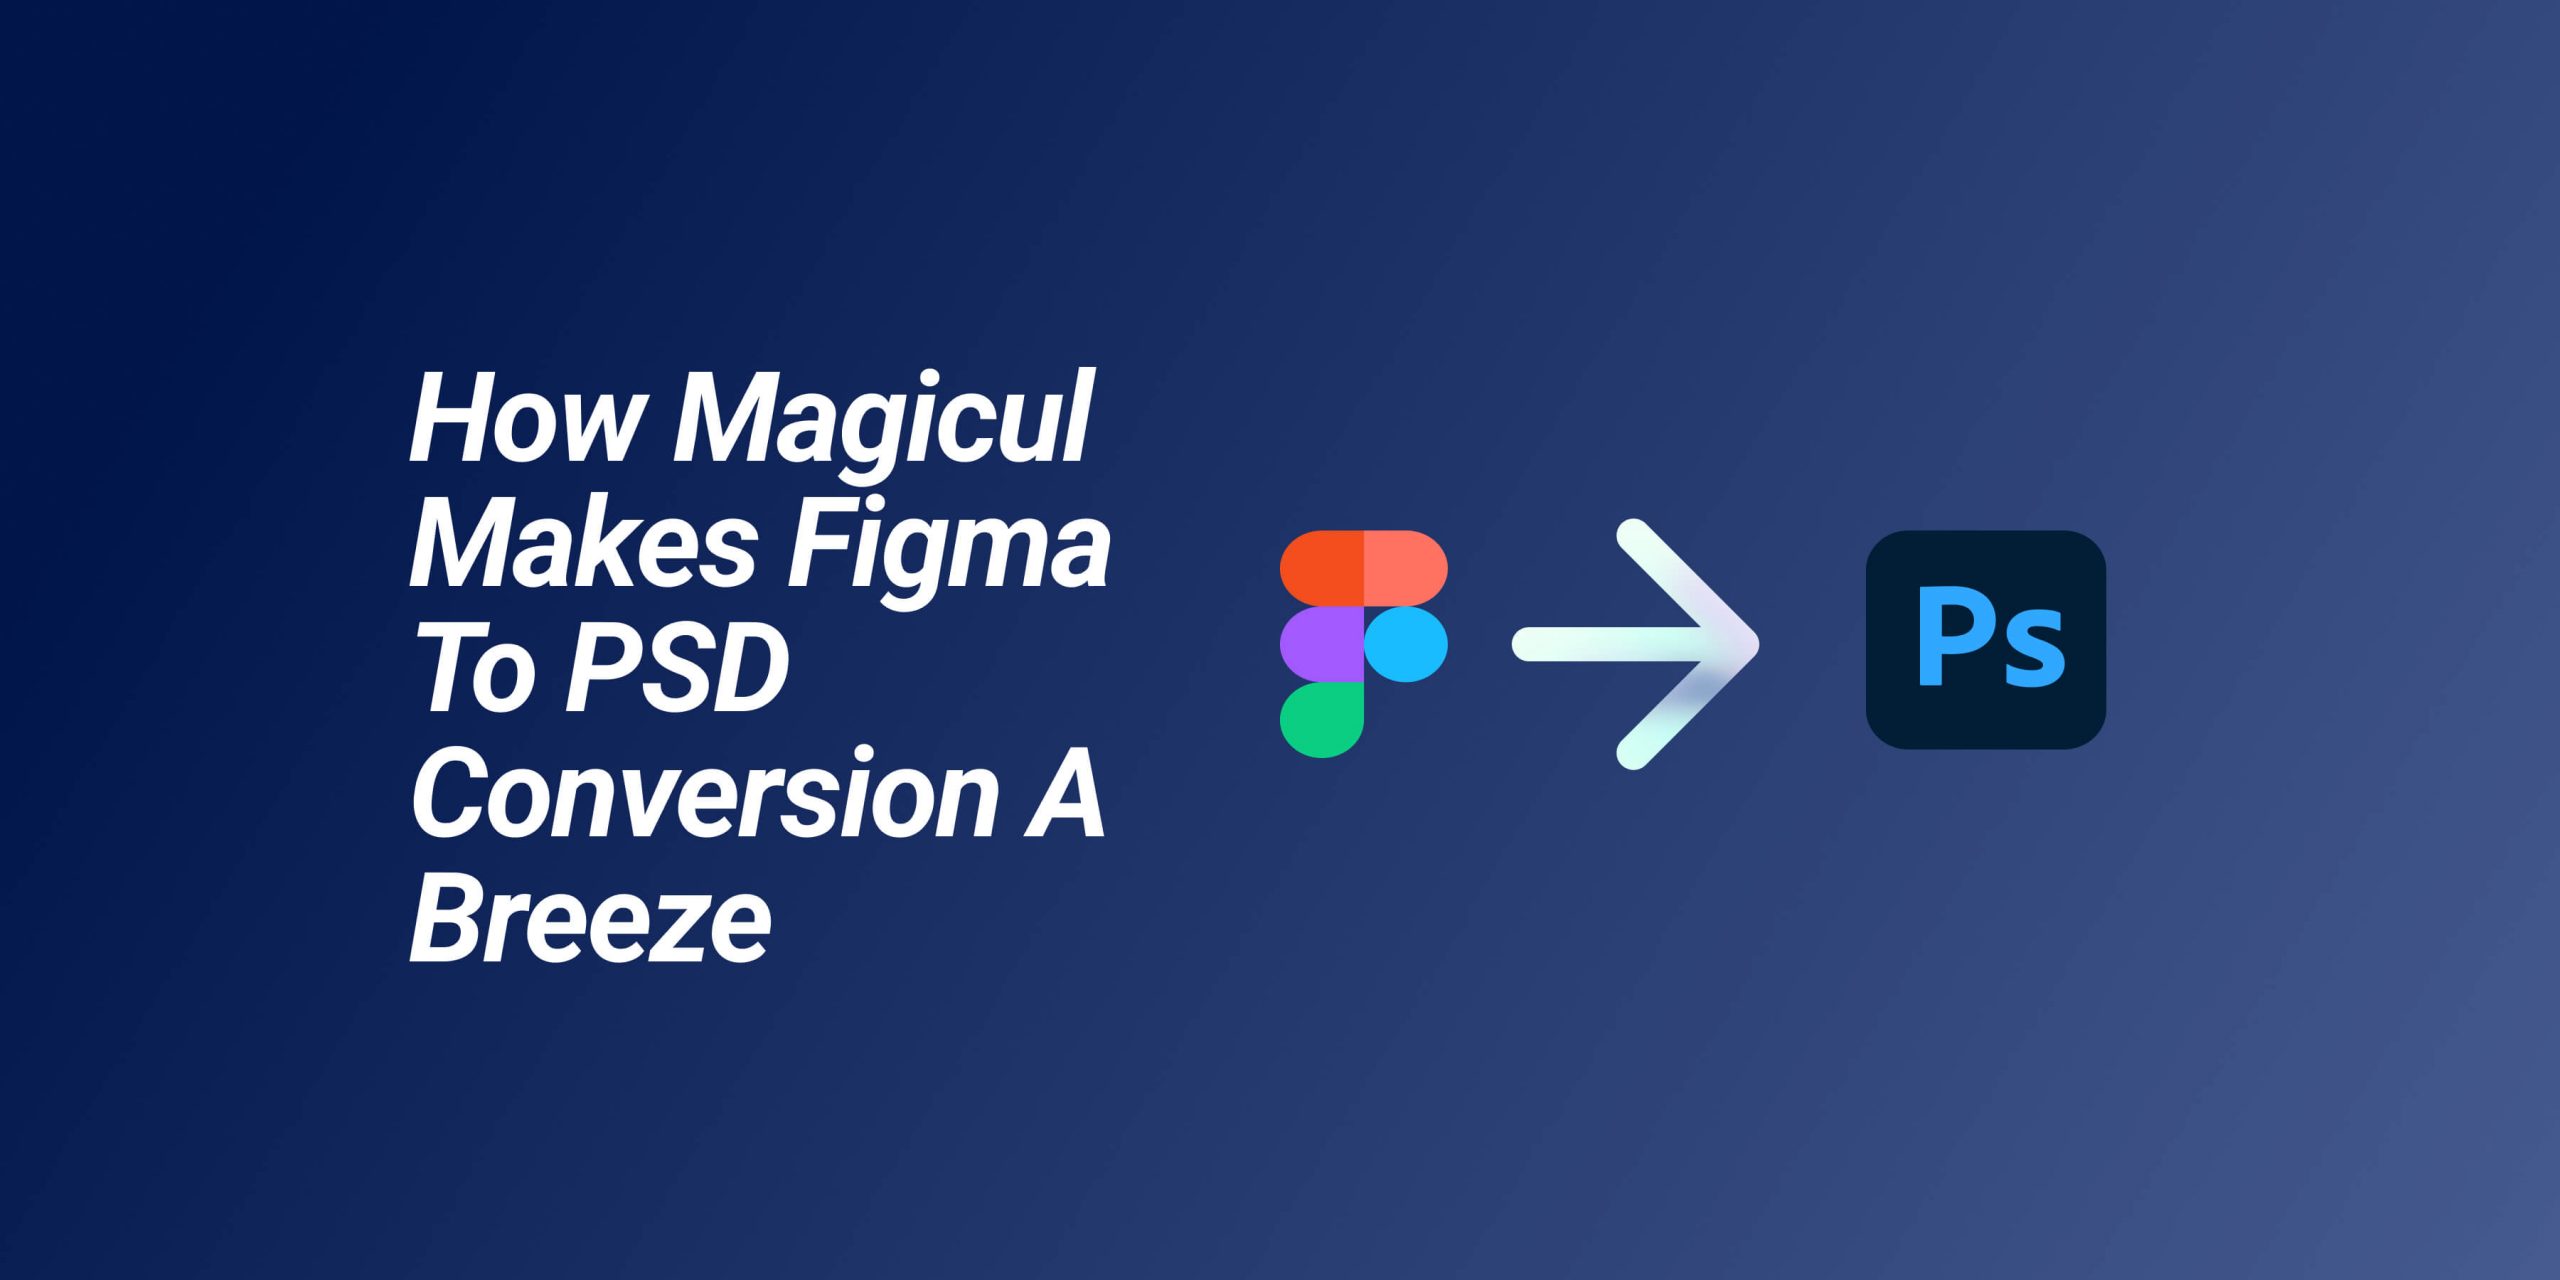 How Magicul Makes Figma to PSD Conversion a Breeze